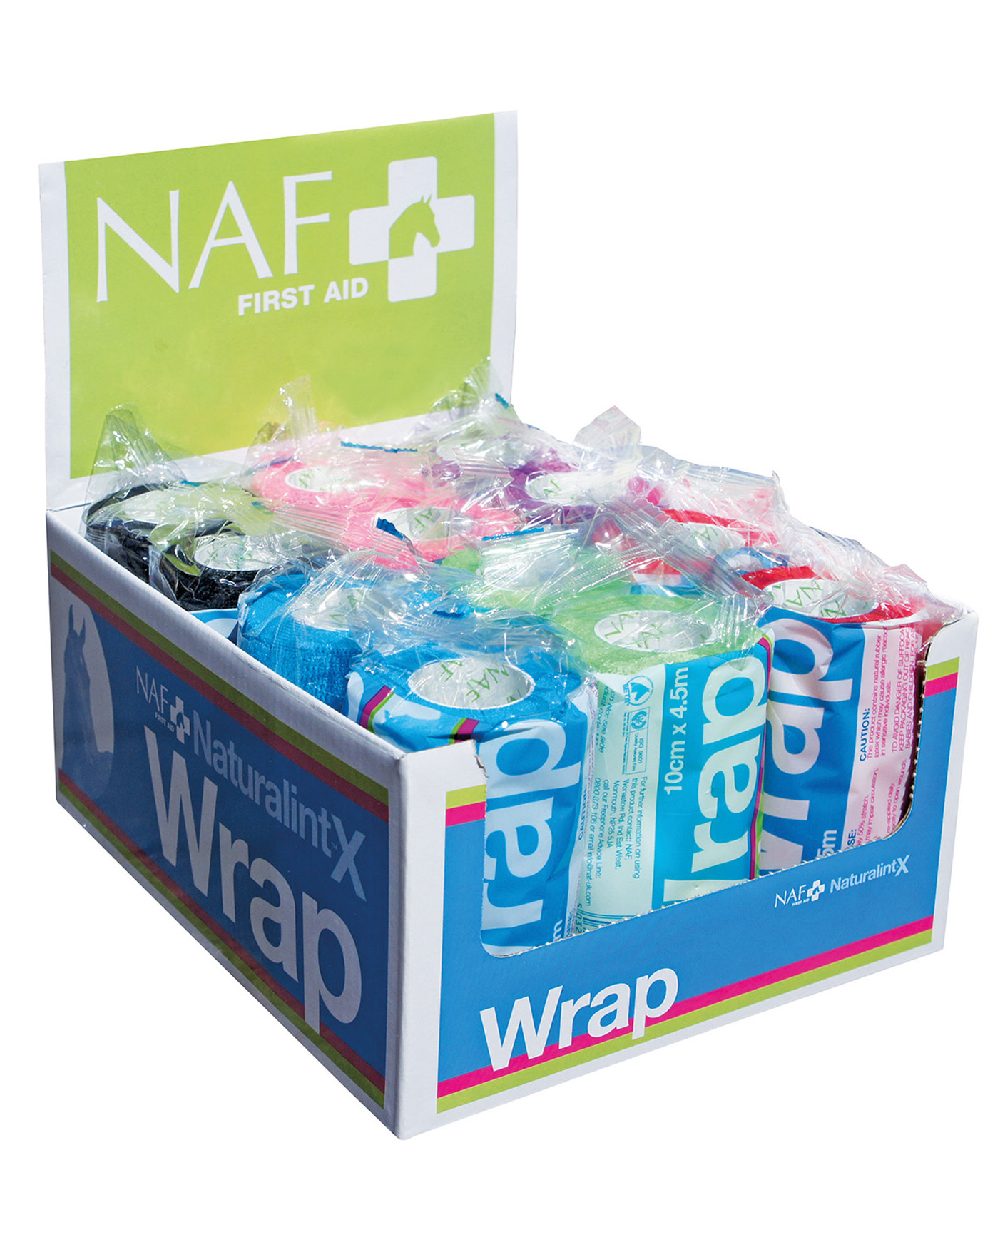 NAF Naturalintx Wrap assorted on white background 